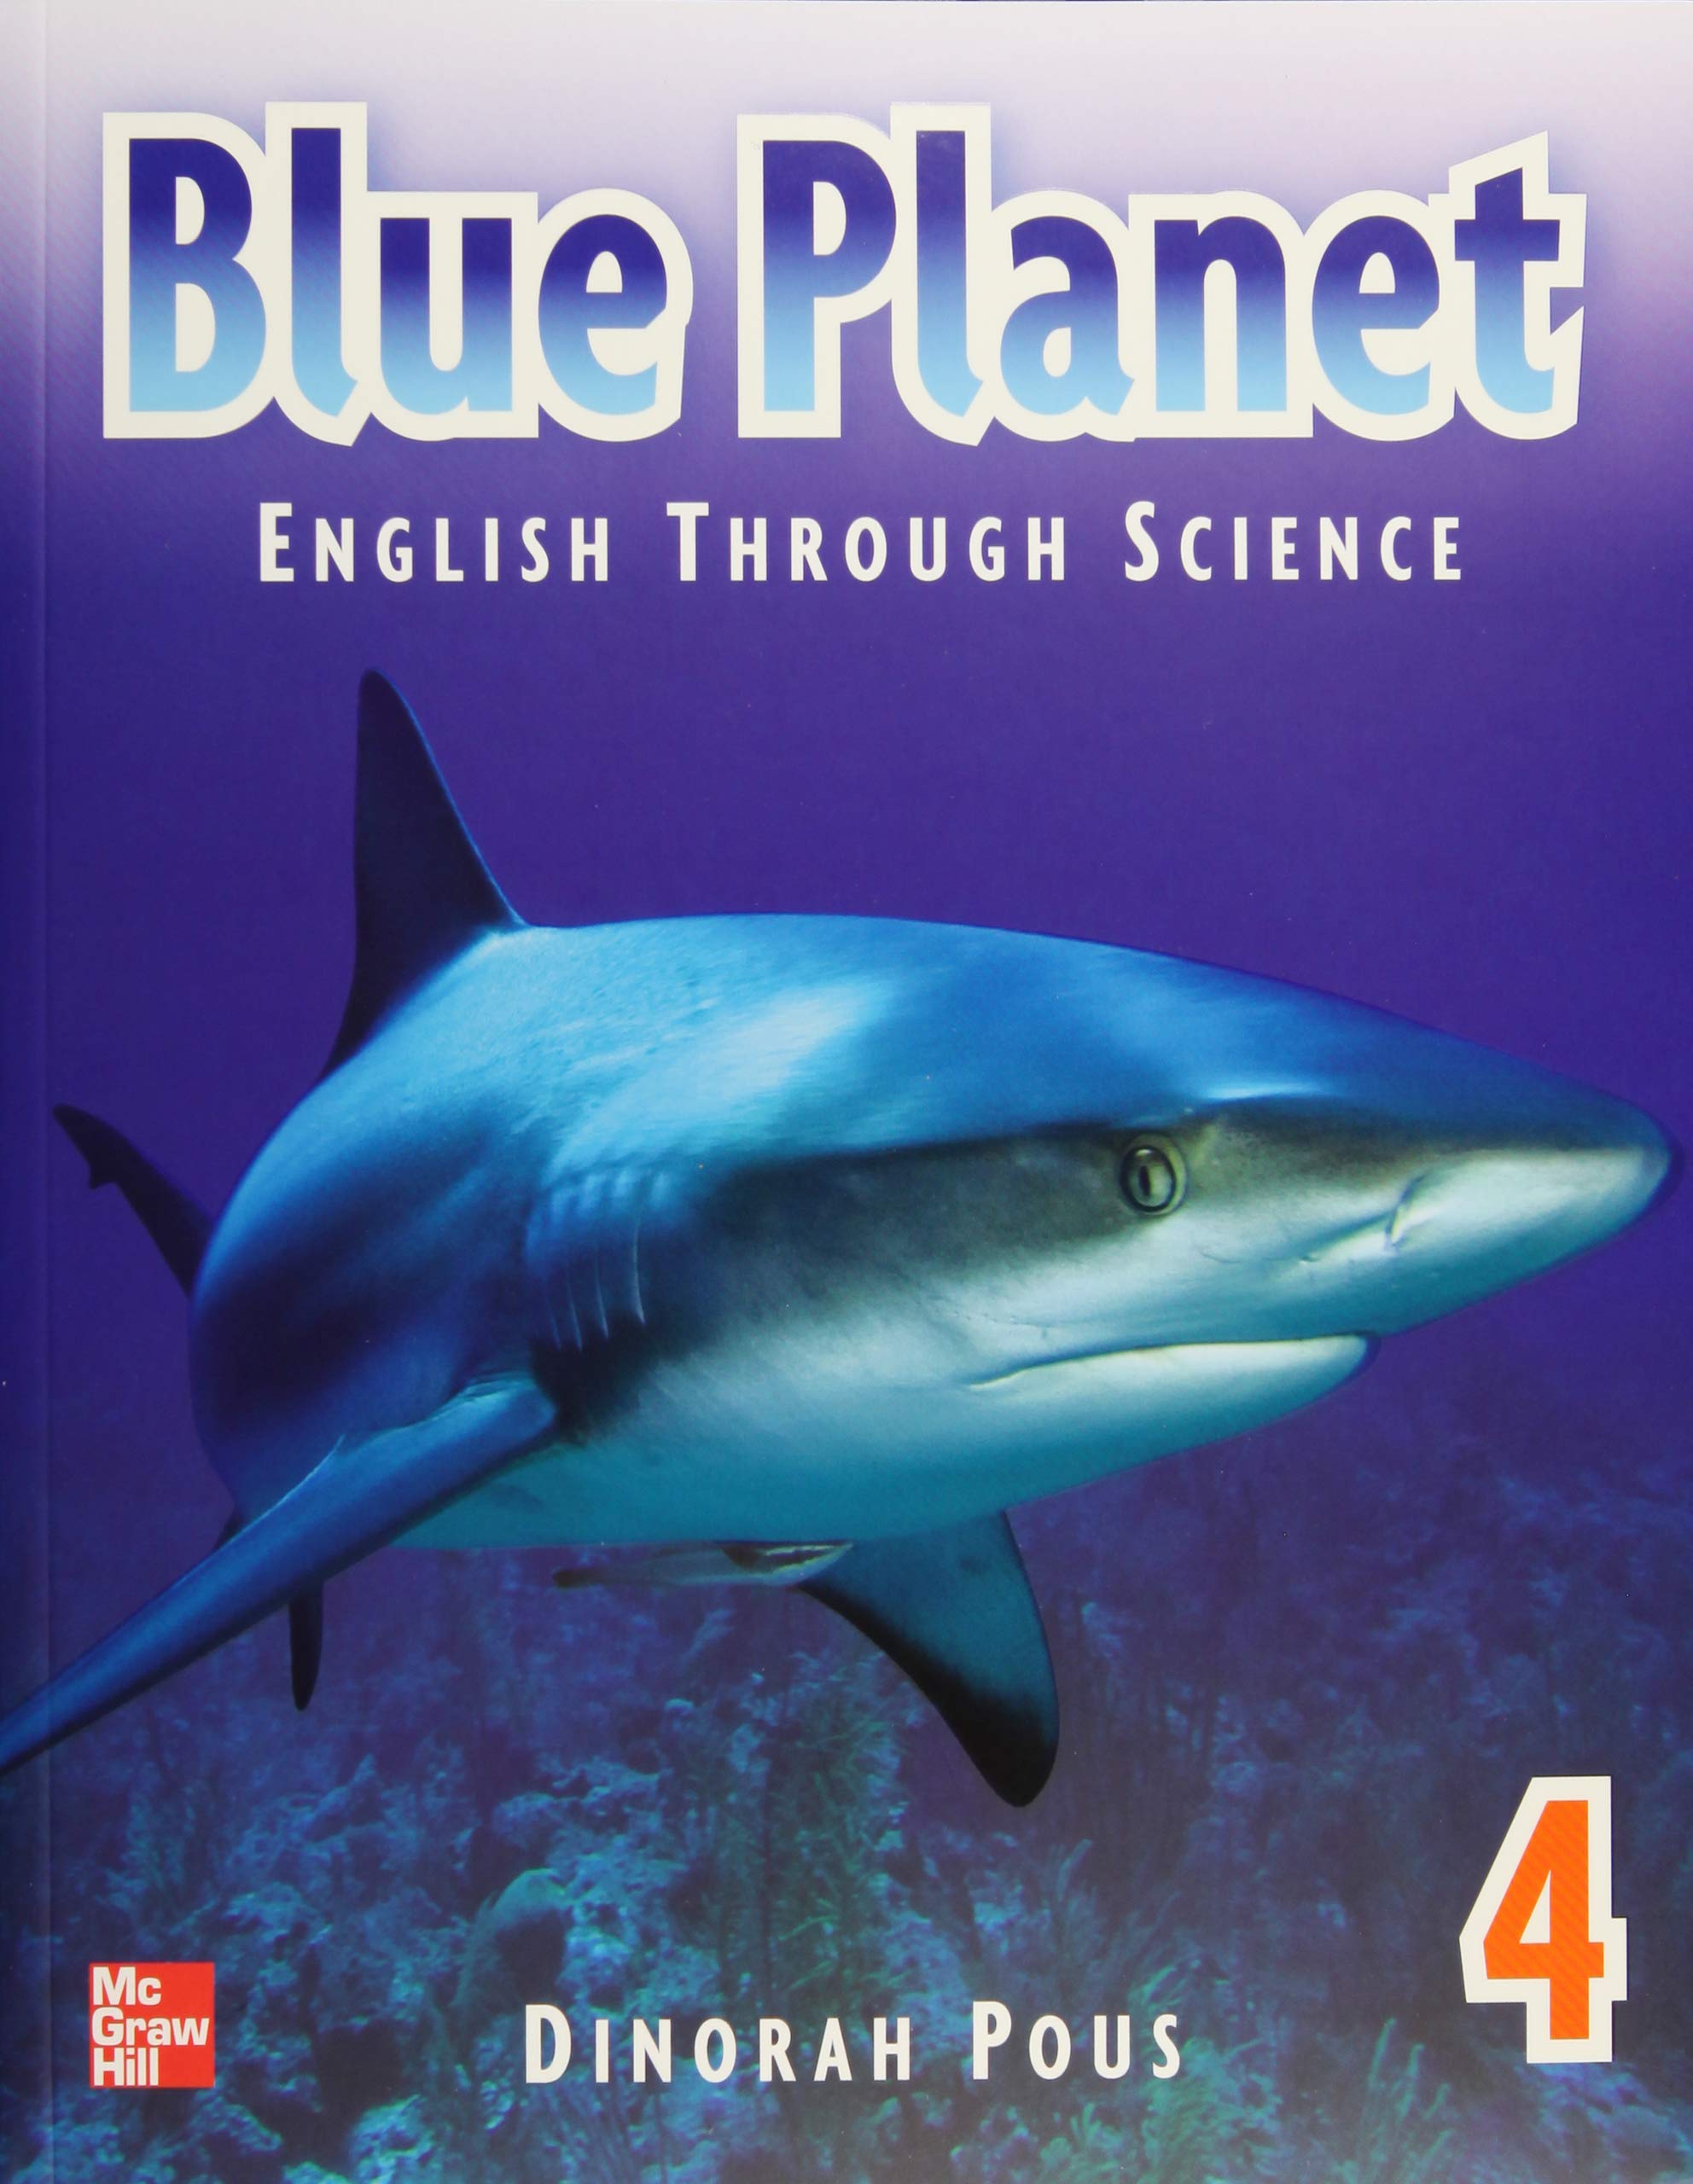 Blue Planet - English through Science (2nd Edition) - Student Book with  interactive CD-ROM (Level 4) by Dinorah Pous on ELTBOOKS - 20% OFF!